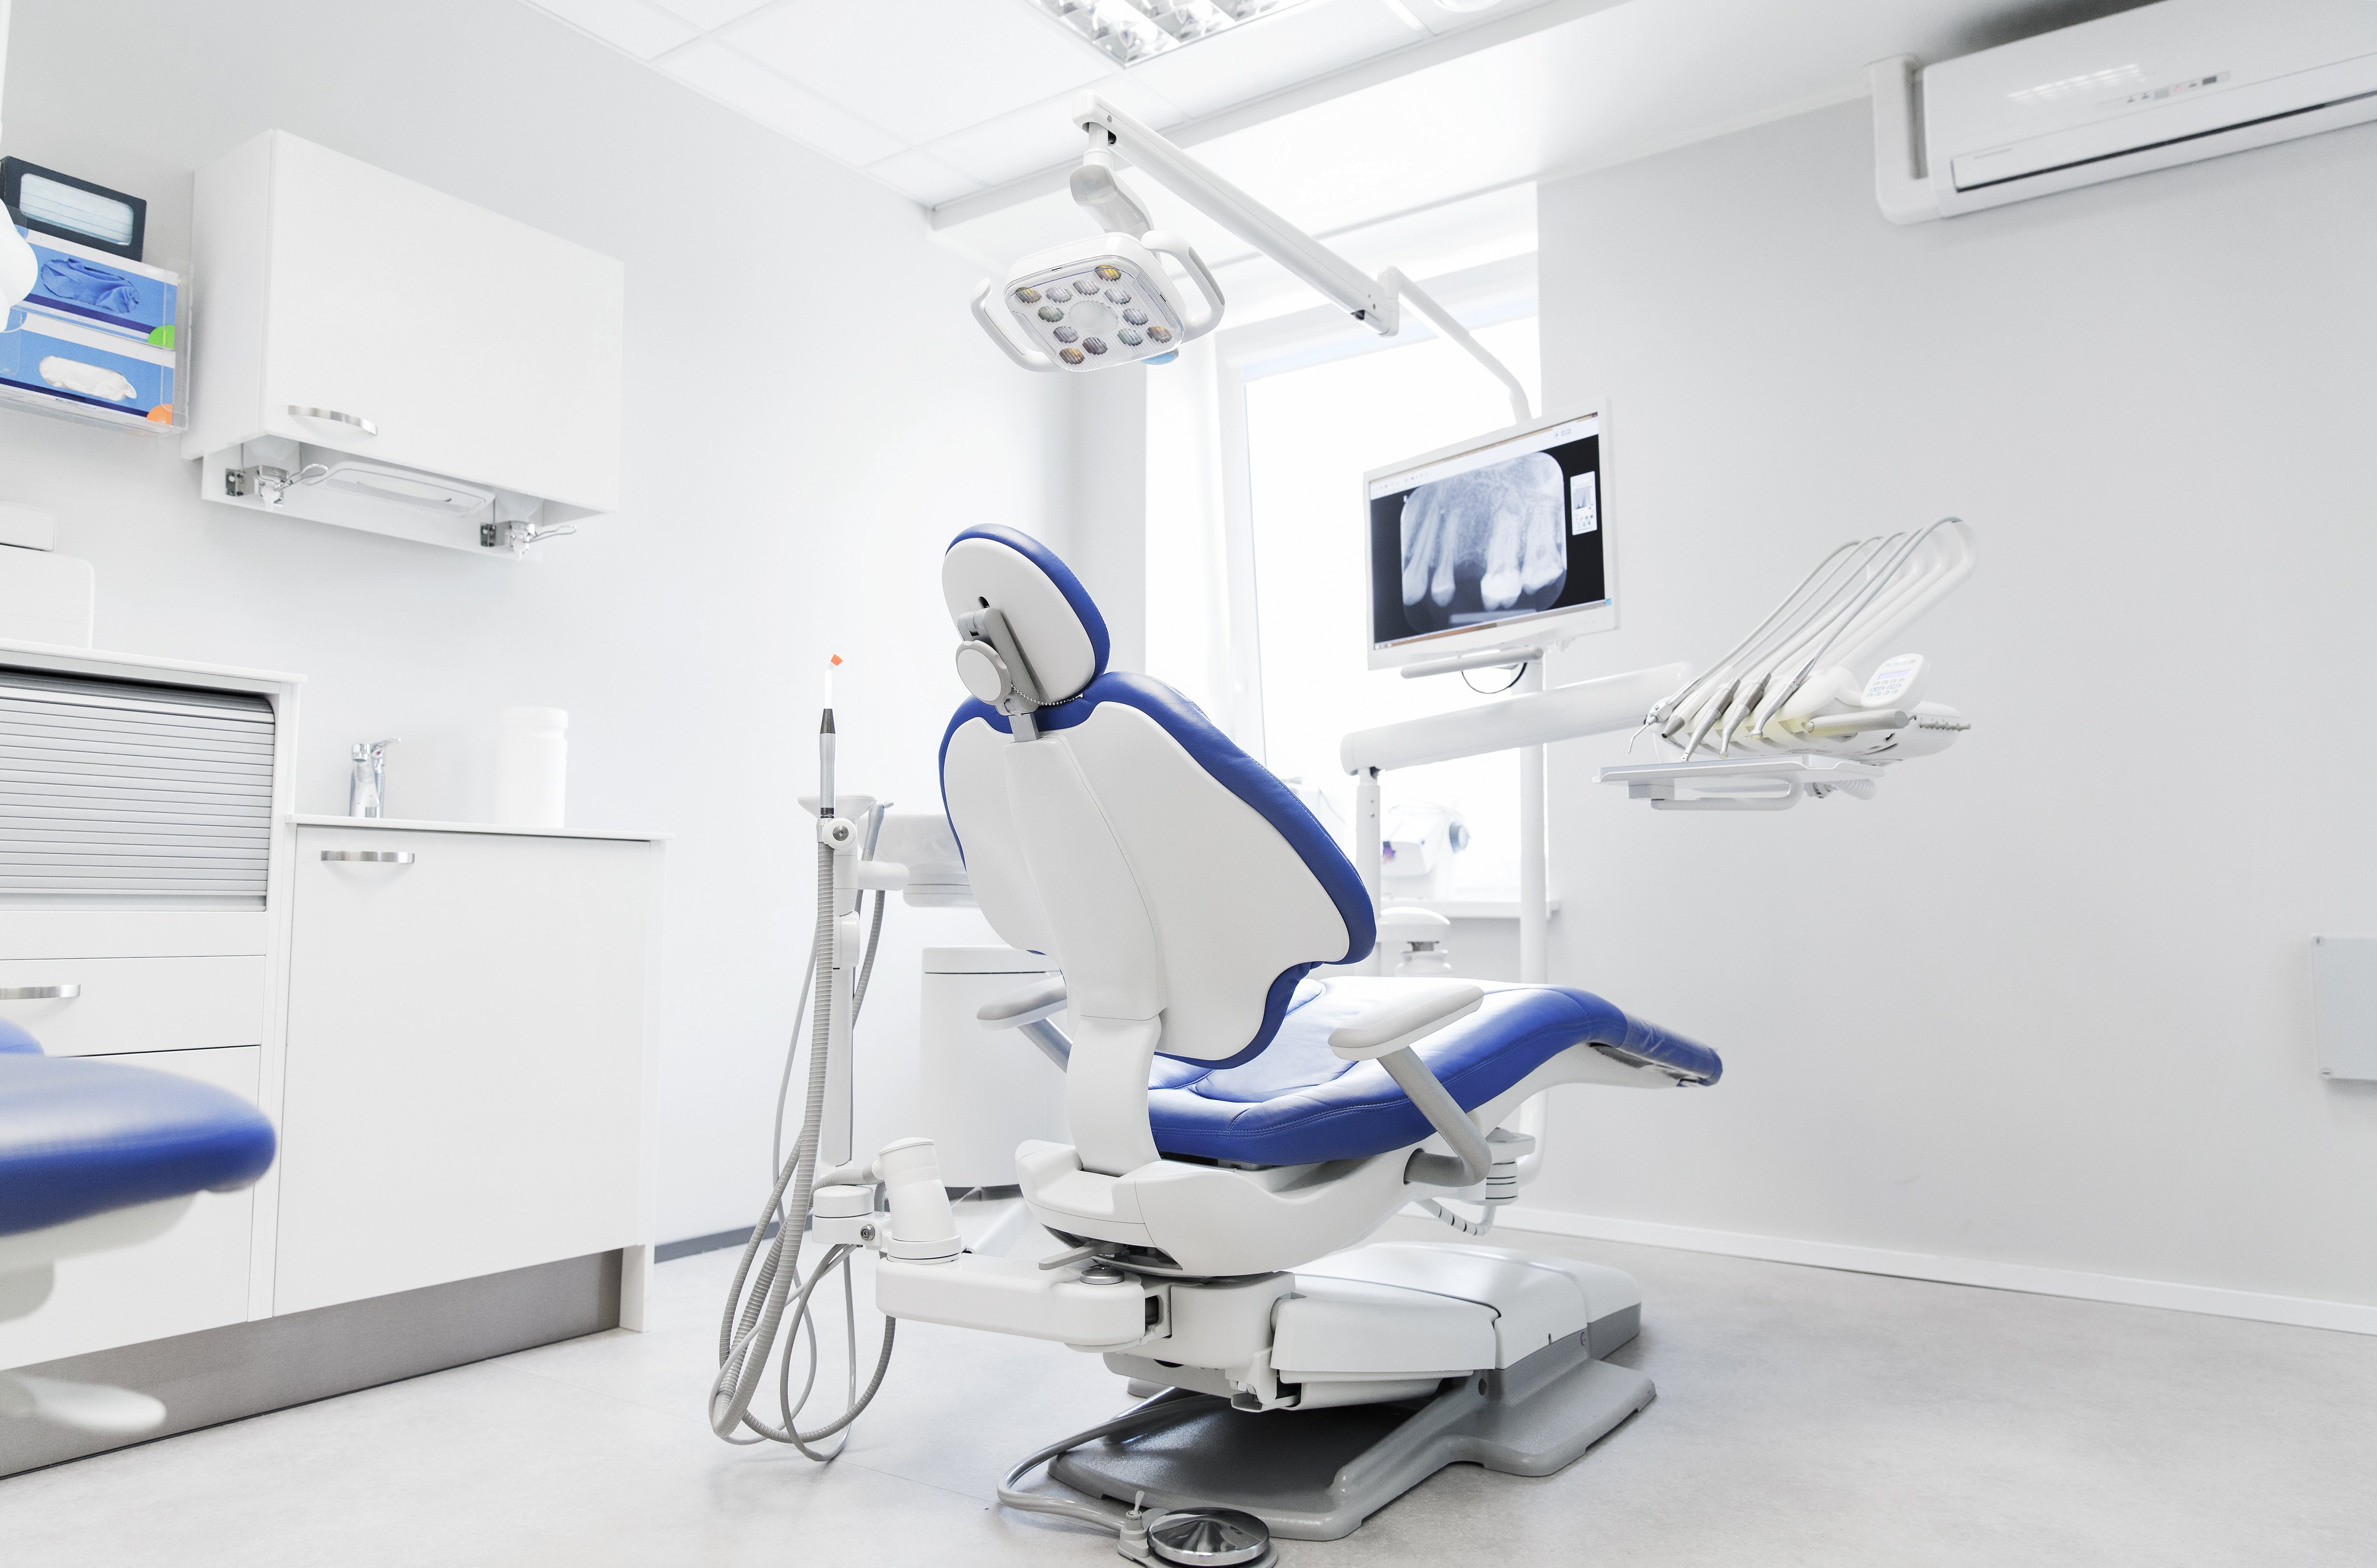 Communicating Dental Safety to Your Patients Post-Pandemic